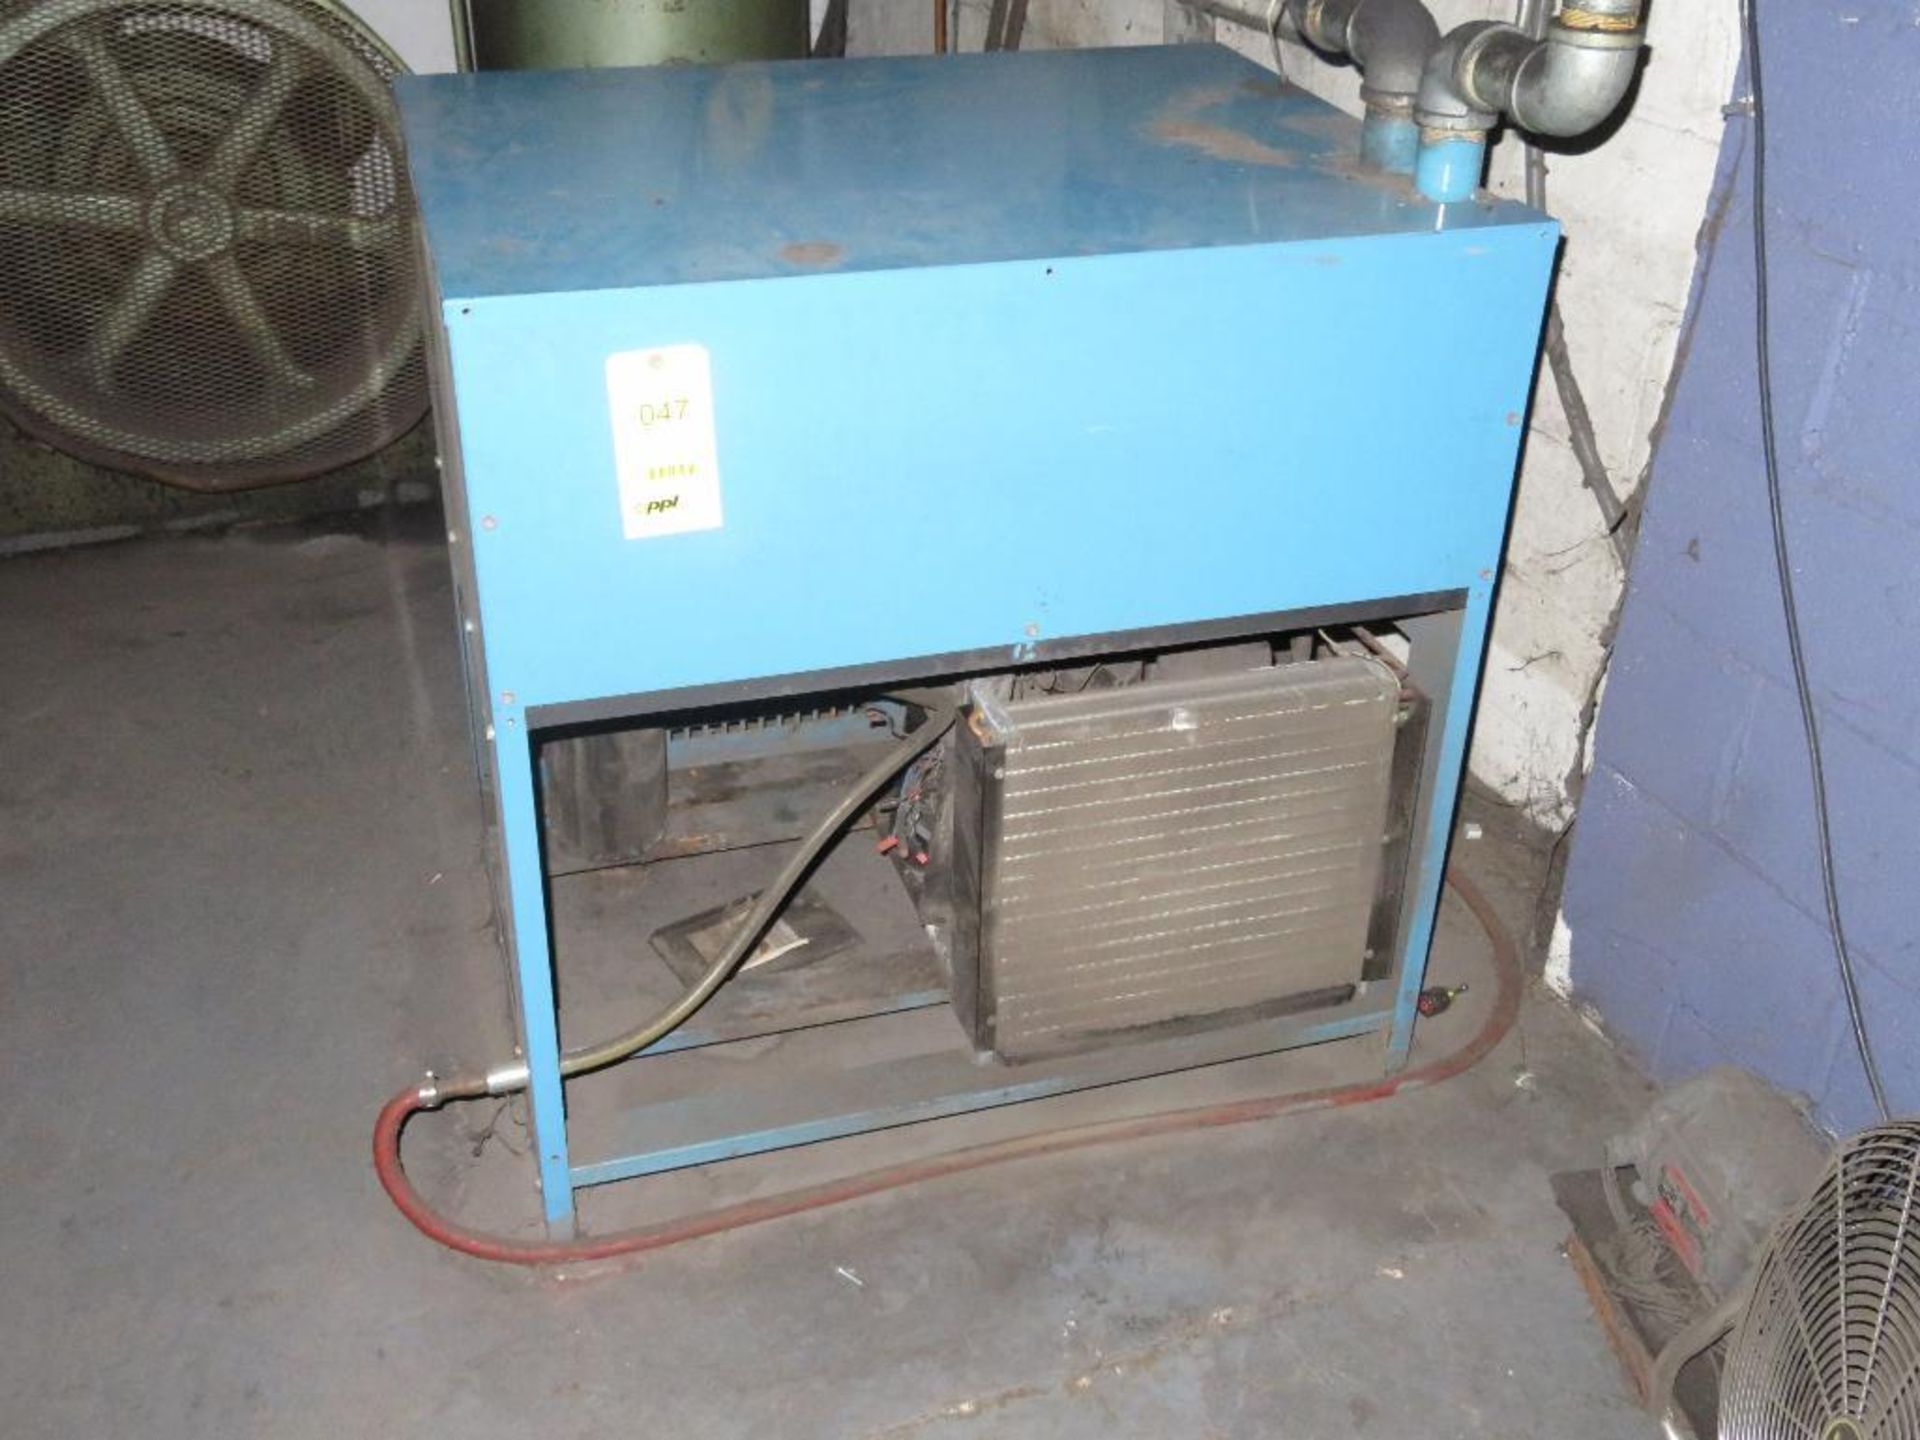 Arrow Pneumatic Refrigerated Air Dryer, Model A250-A, S/N TH146 - Image 2 of 2